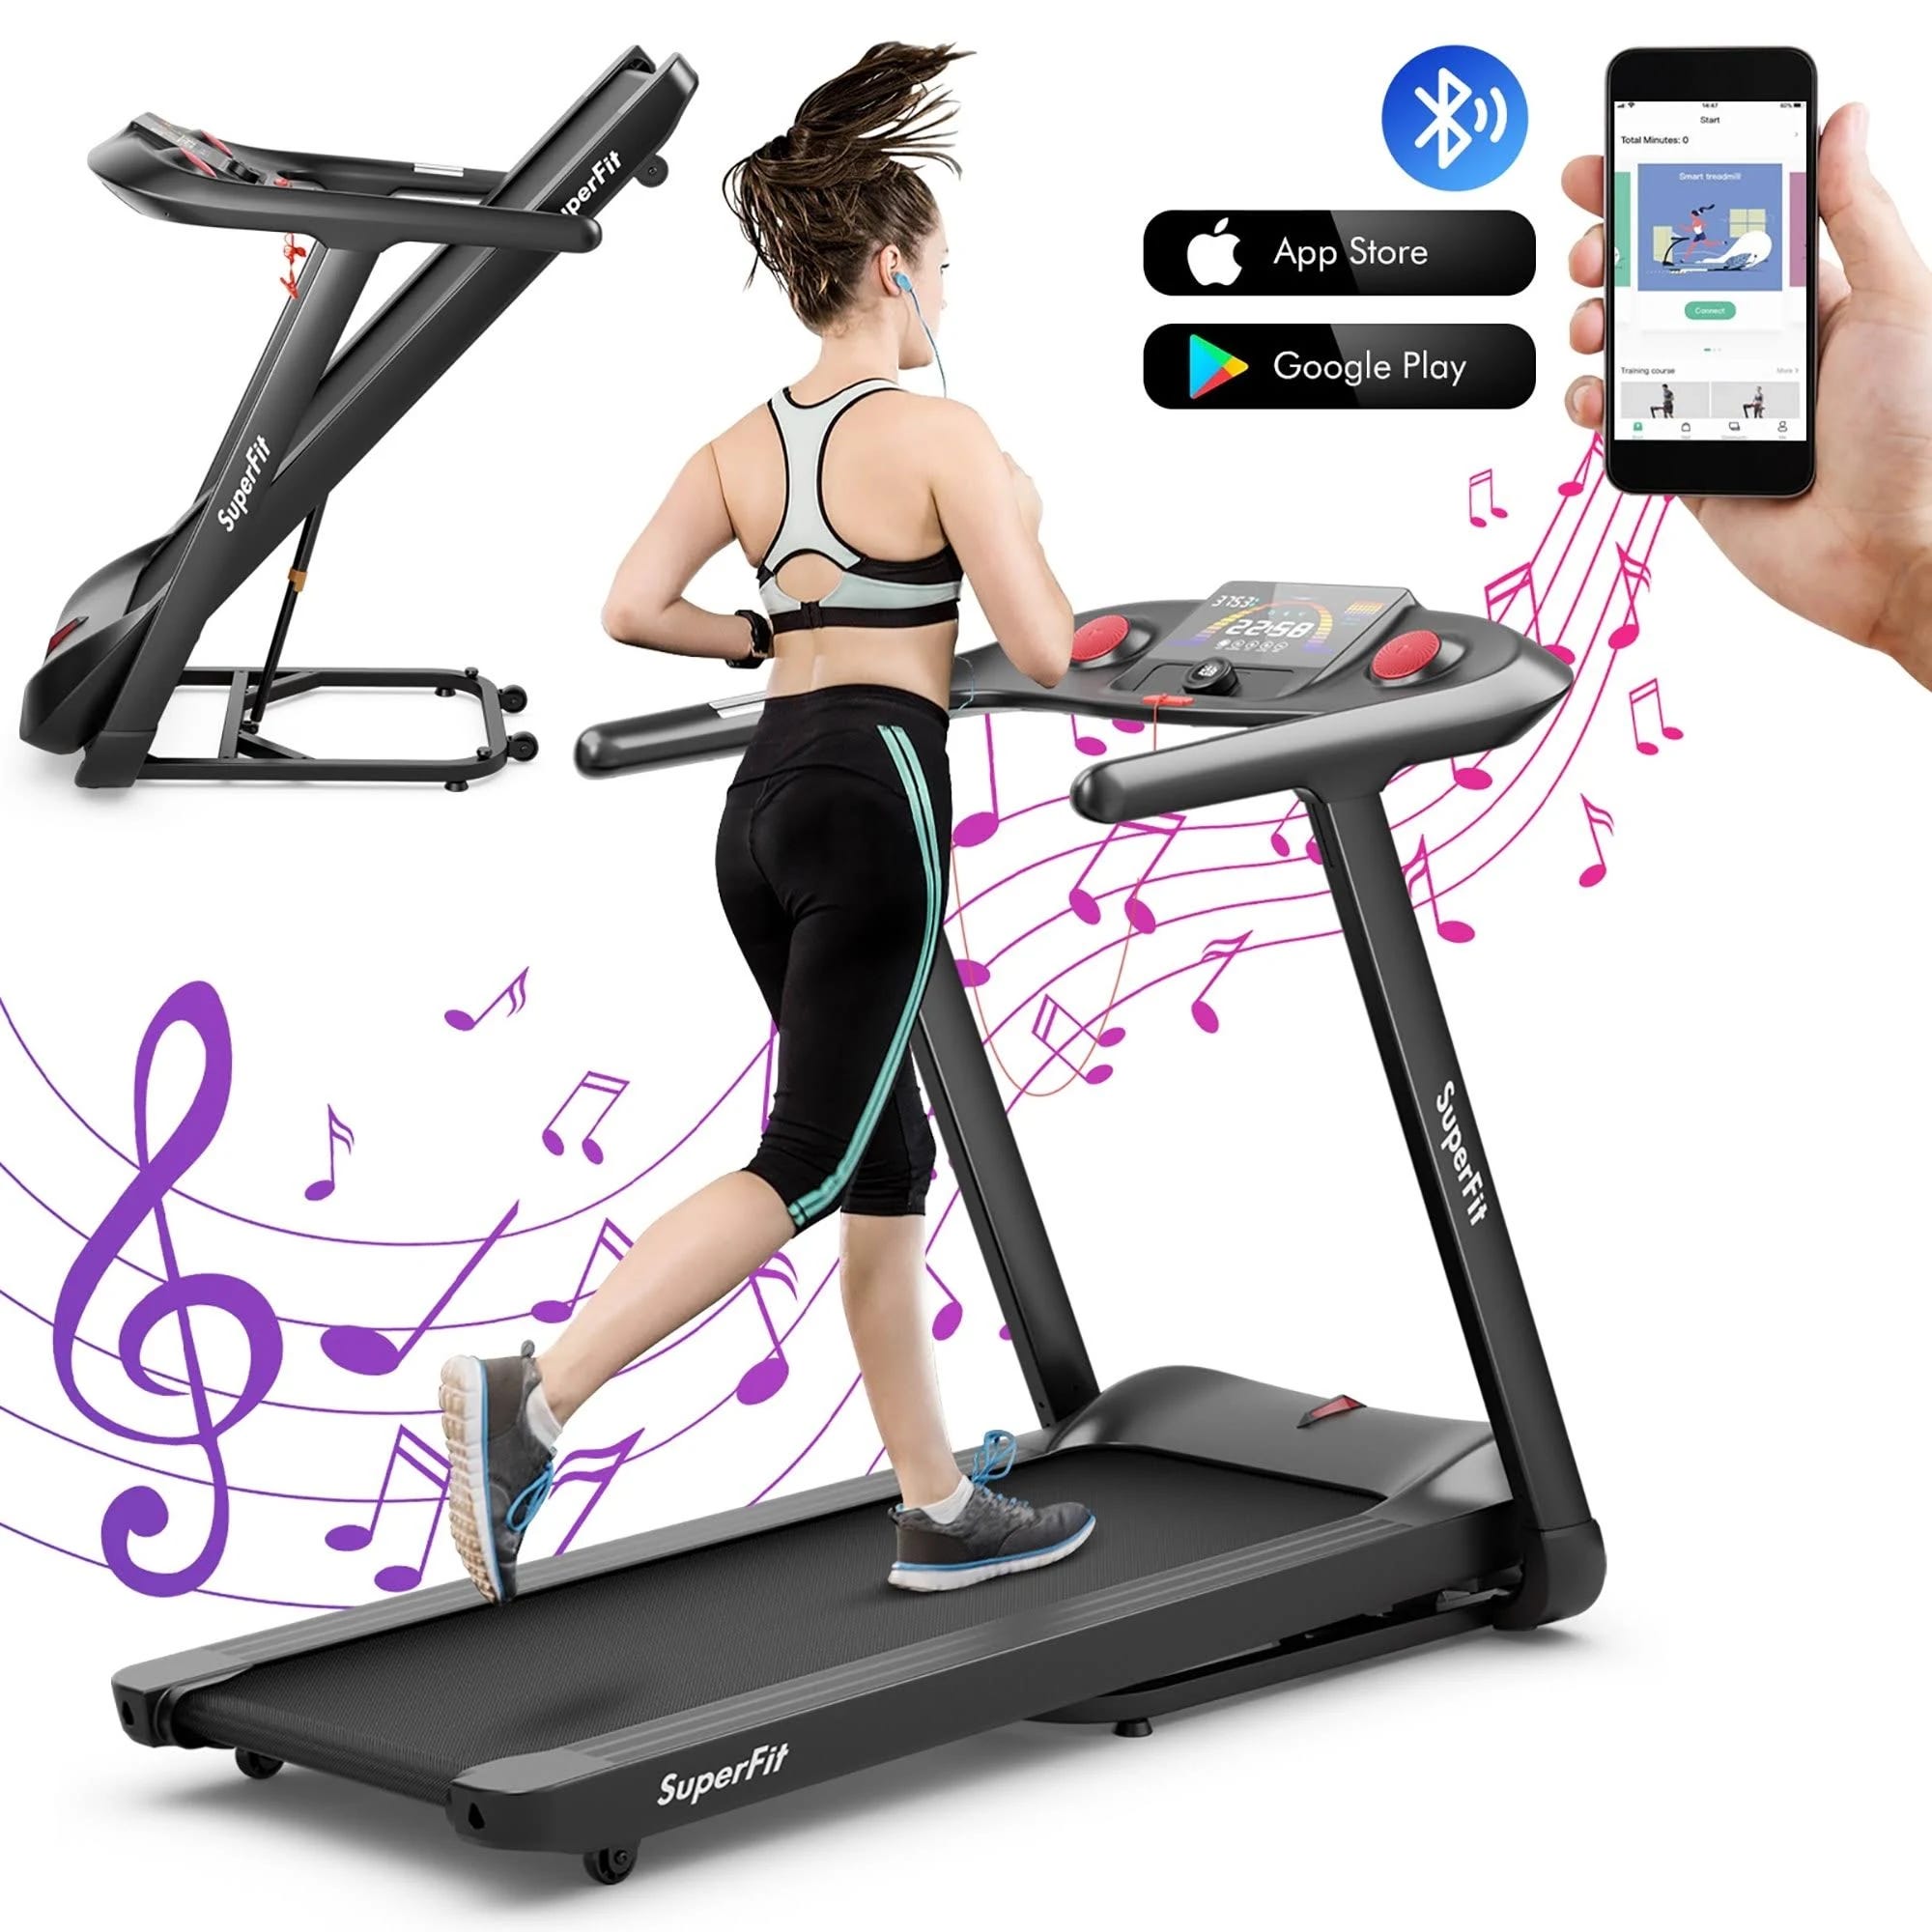 Folding SuperFit Treadmill with 4.75 HP Motor and Pre-Programmed Workouts | Image